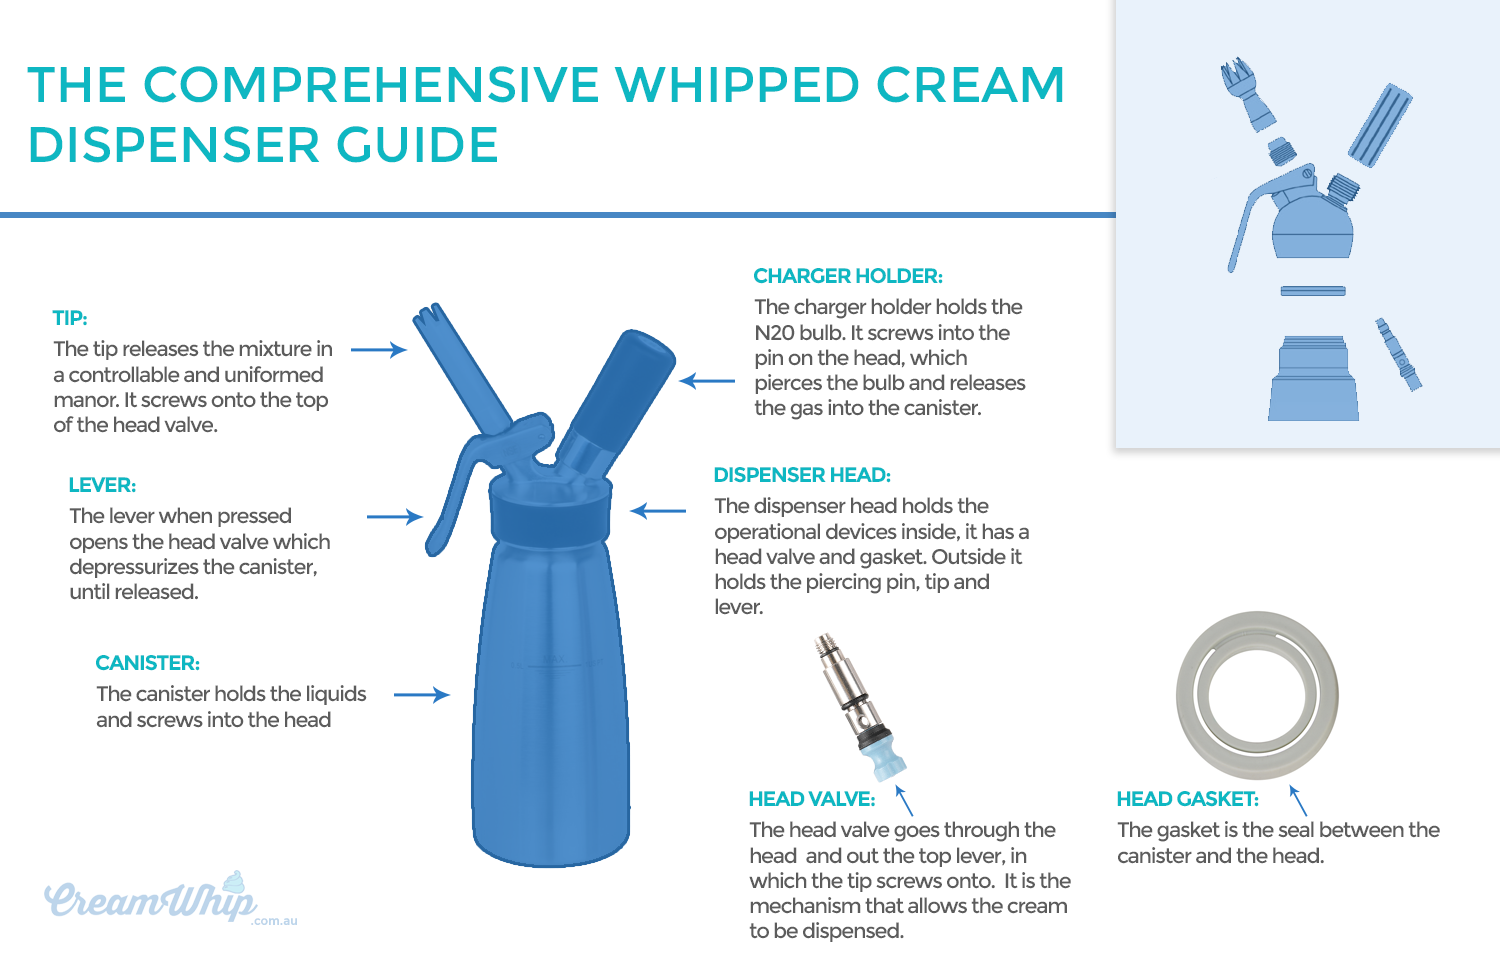 https://www.creamwhip.com.au/wp-content/uploads/2018/03/whipped-cream-dispenser-guide.png